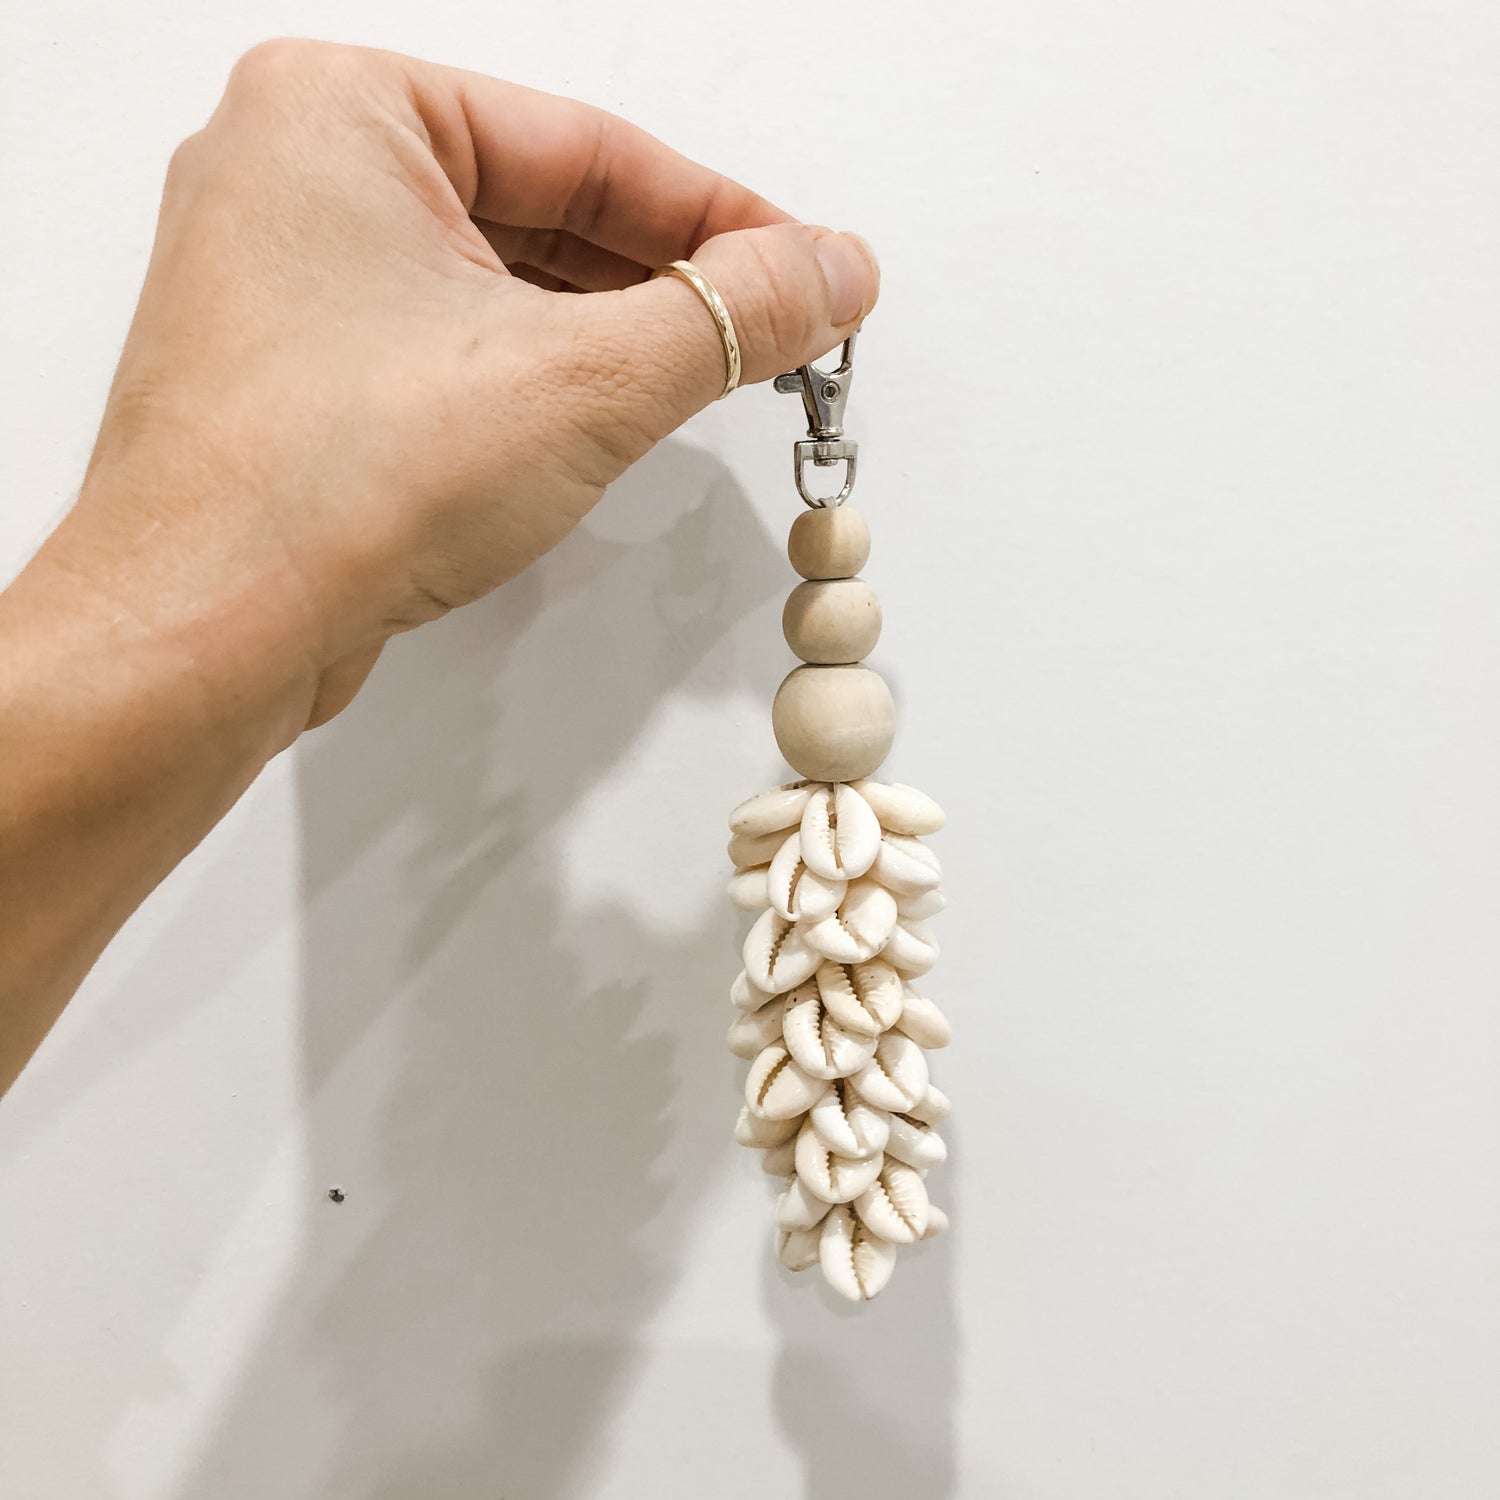 Natural Cowrie Key Ring